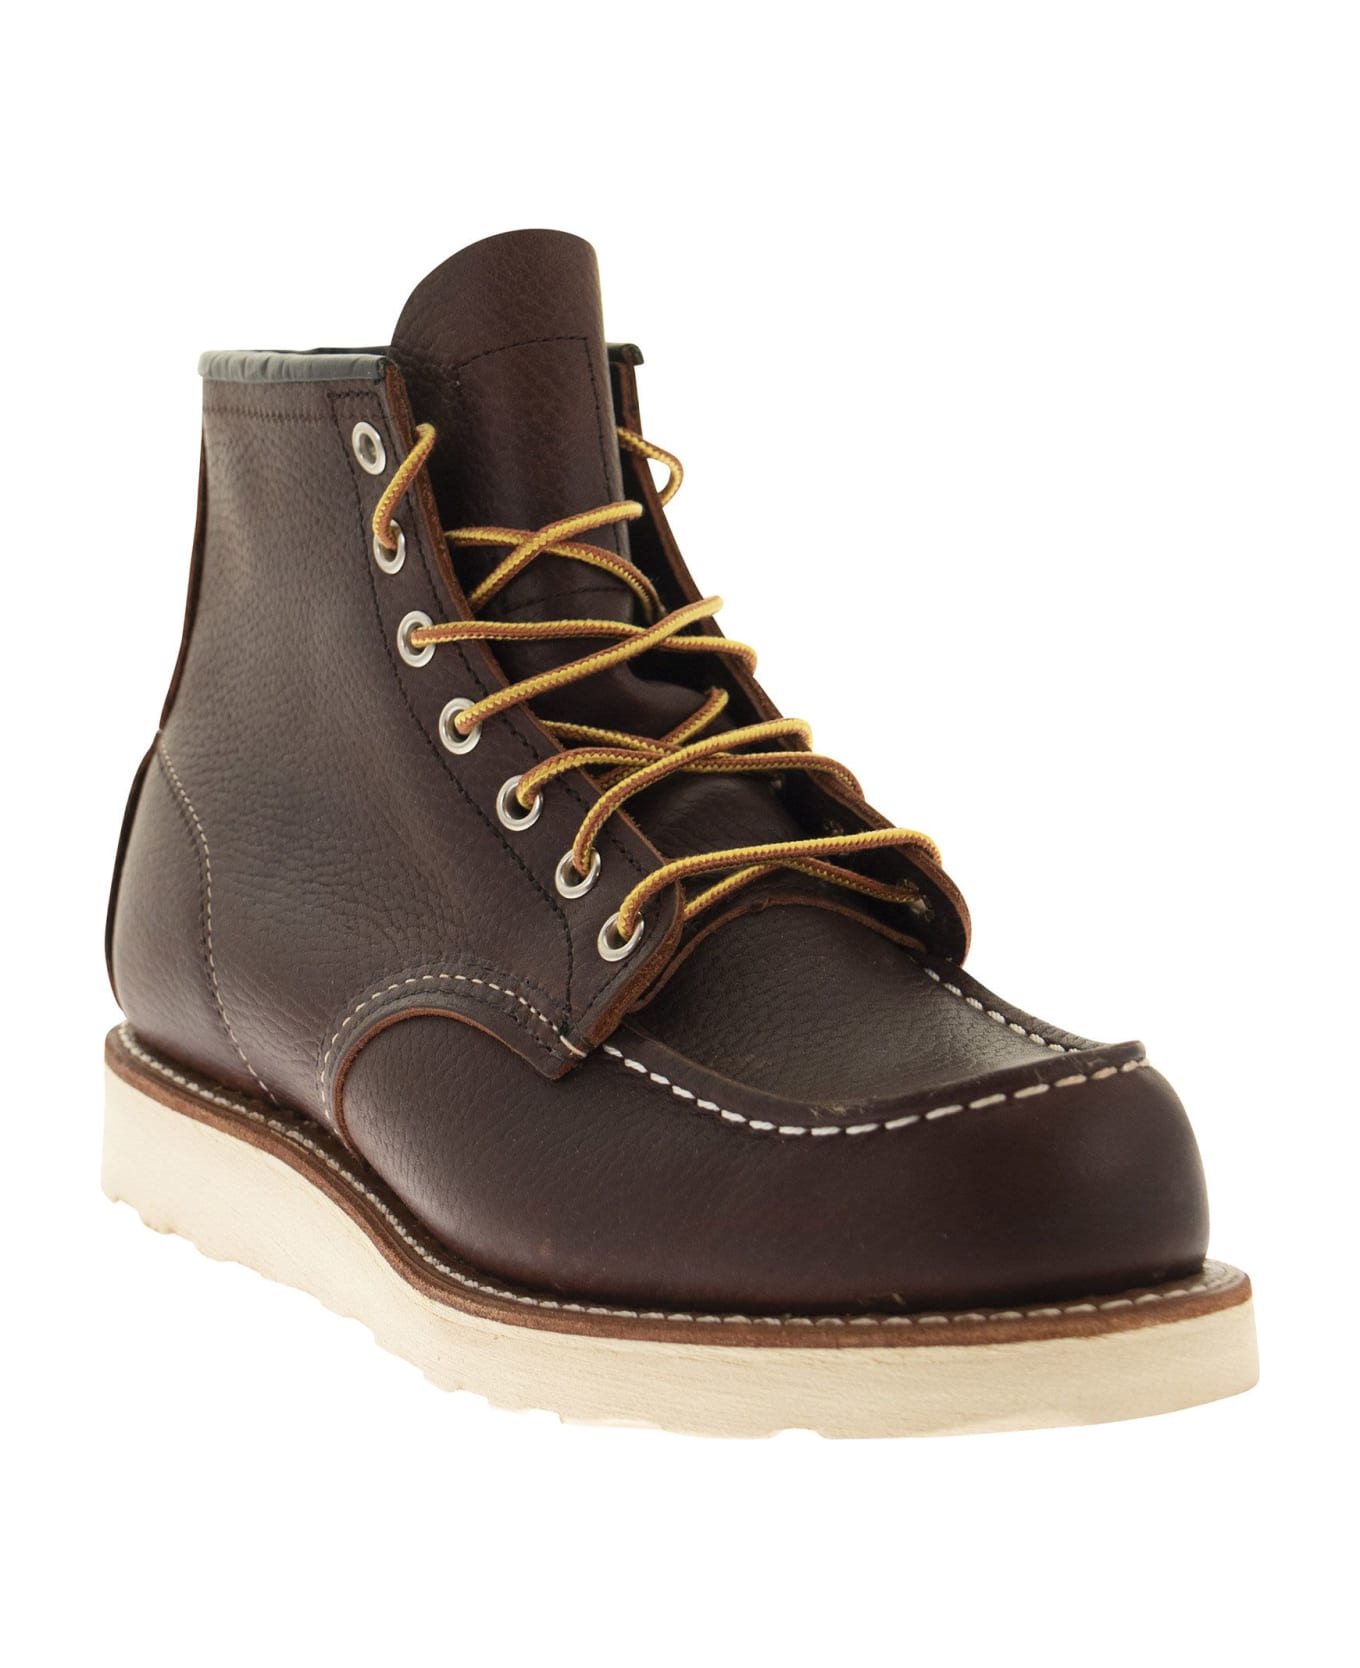 Red Wing Classic Moc 8138 - Lace-up Boot - Brown